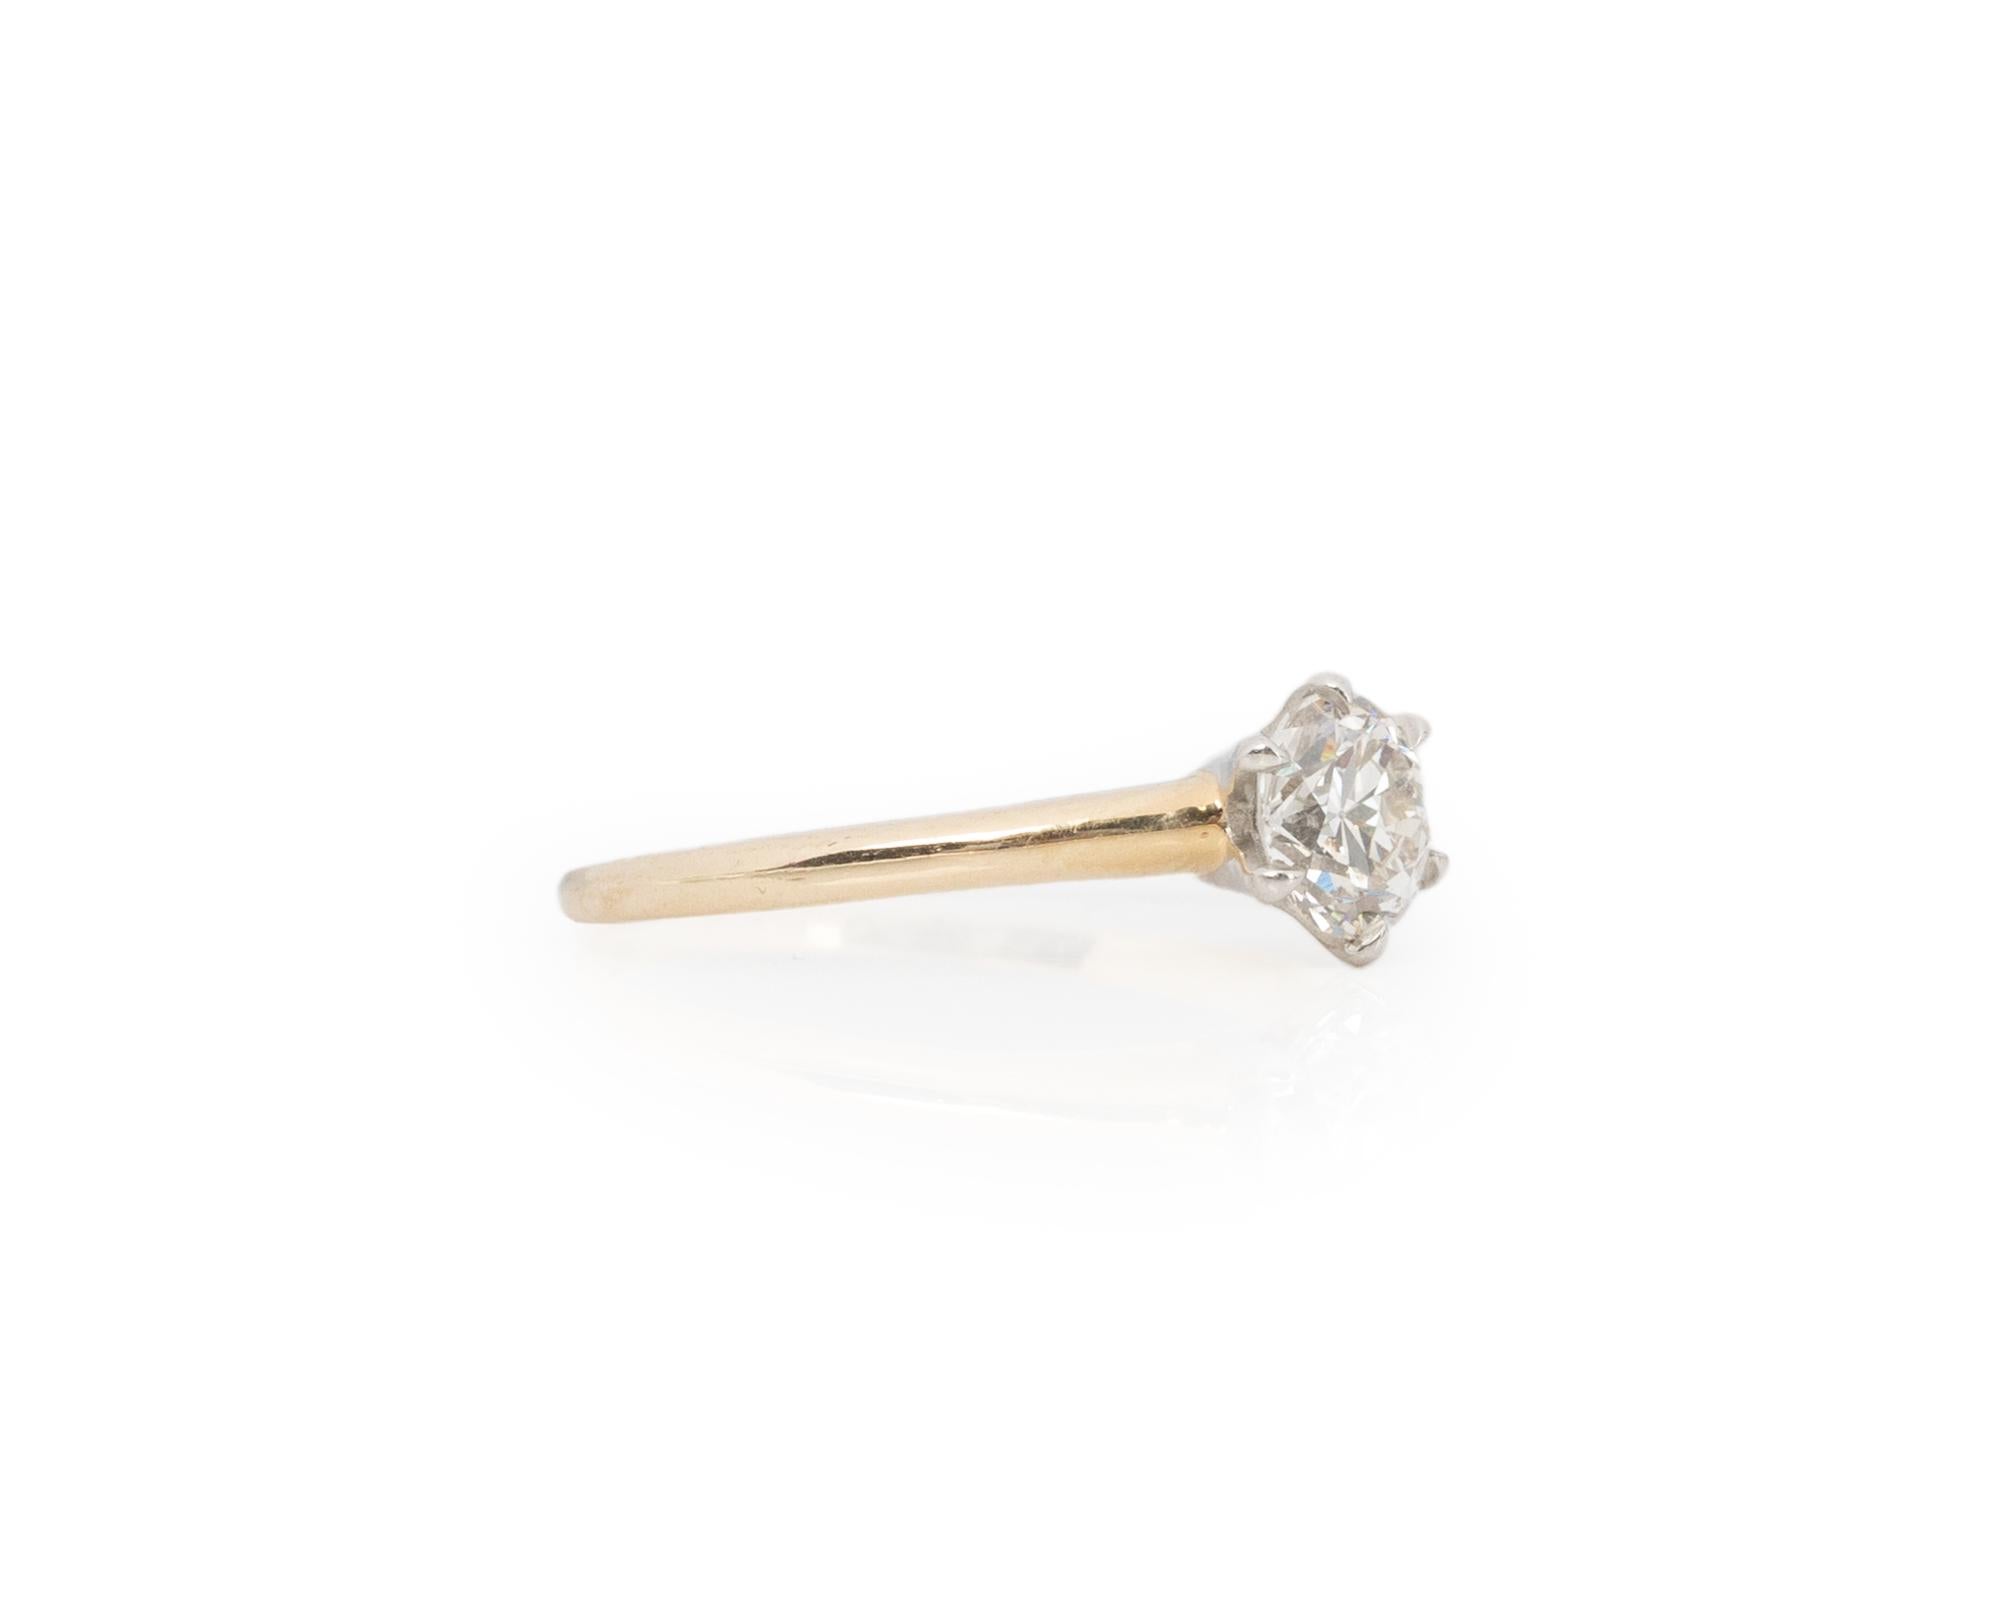 Ring Size: 6.25
Metal Type: 14K Yellow Gold and Platinum [Hallmarked, and Tested]
Weight: 1.9 grams

Center Diamond Details:
Weight: .73ct
Cut: Old European brilliant
Color: J
Clarity: VS1

Finger to Top of Stone Measurement: 5.0mm
Shank/Band Width: